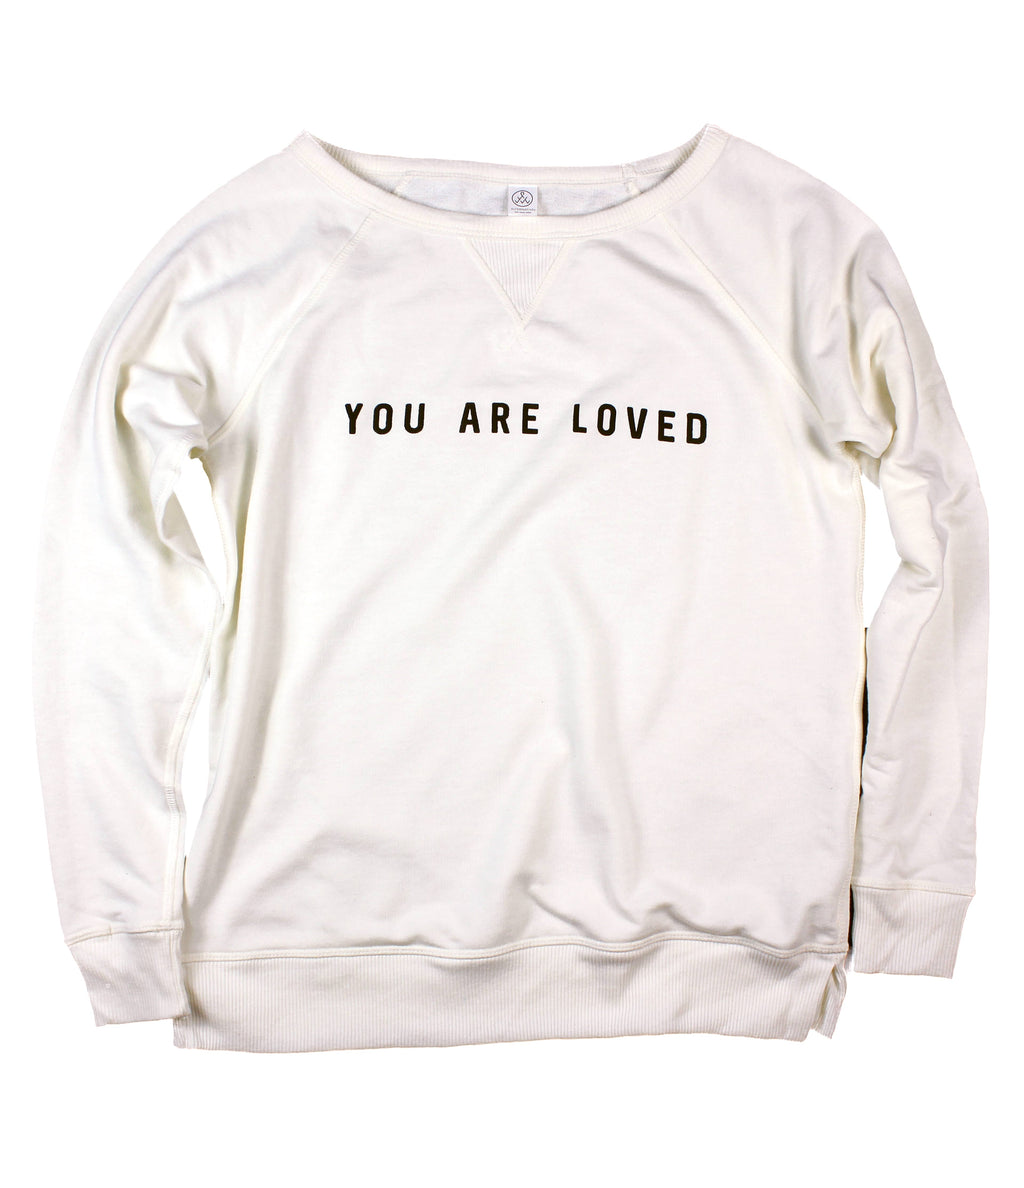 YOU ARE LOVED VINTAGE WHITE WOMEN'S FRENCH TERRY SWEATSHIRT